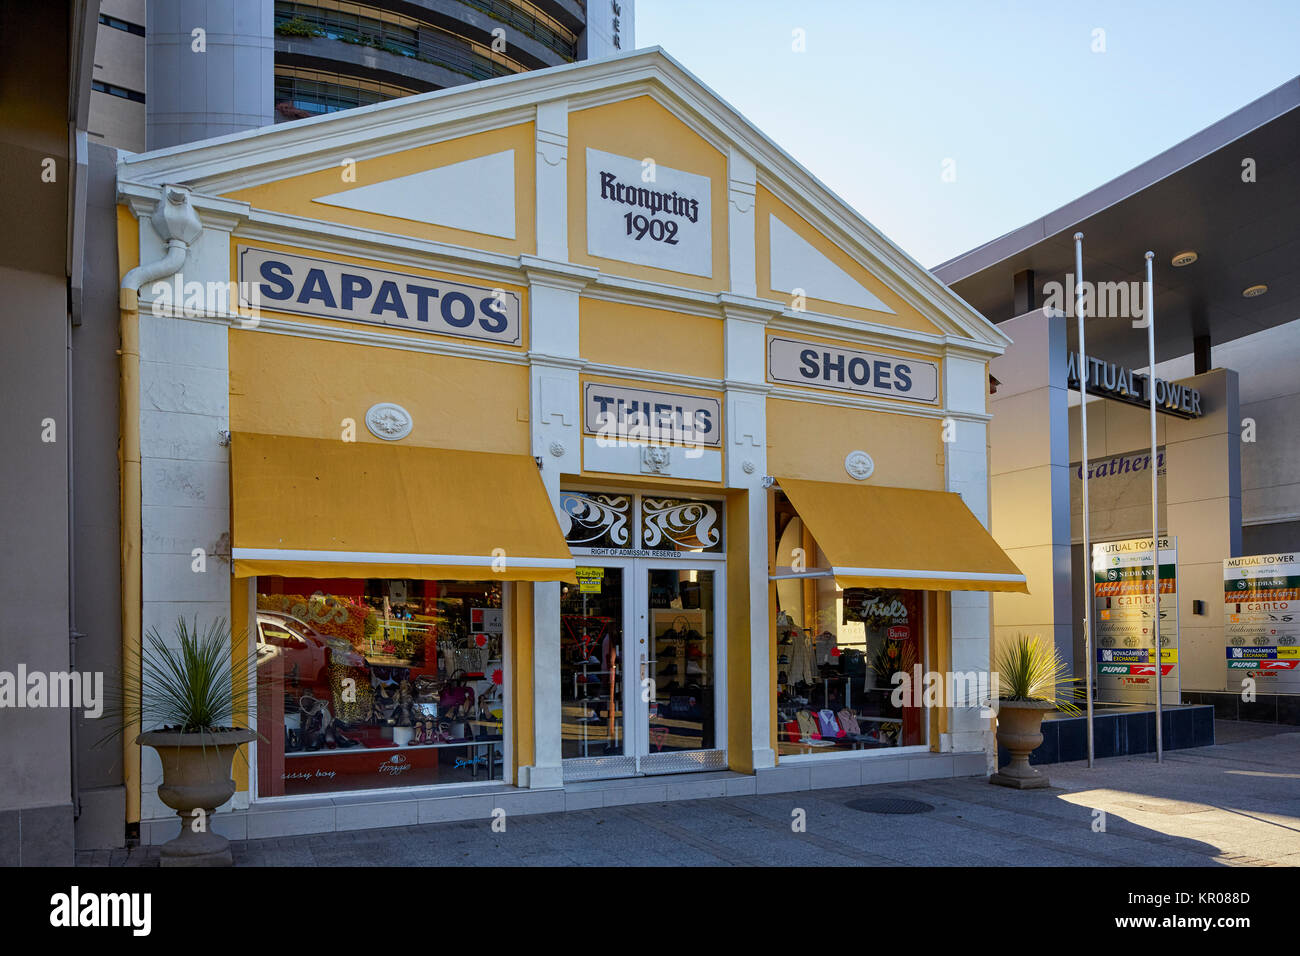 Calzatura Kromprinz Store (sapatos, thiels) su Viale Indipendenza, a Windhoek, Namibia, Africa Foto Stock